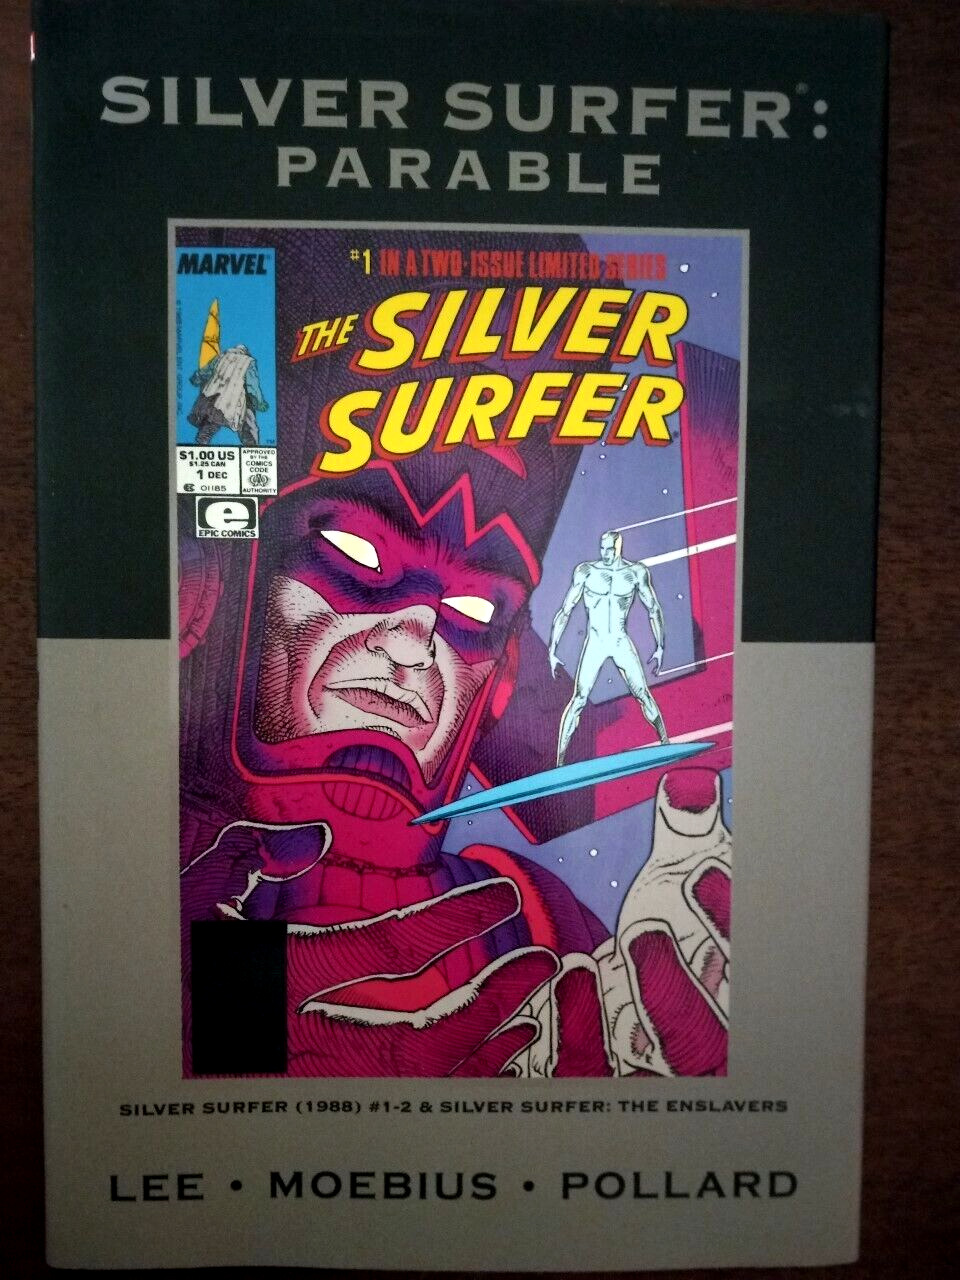 Silver Surfer: Parable Hard Cover Marvel Comic Limited Print Collector's Edition